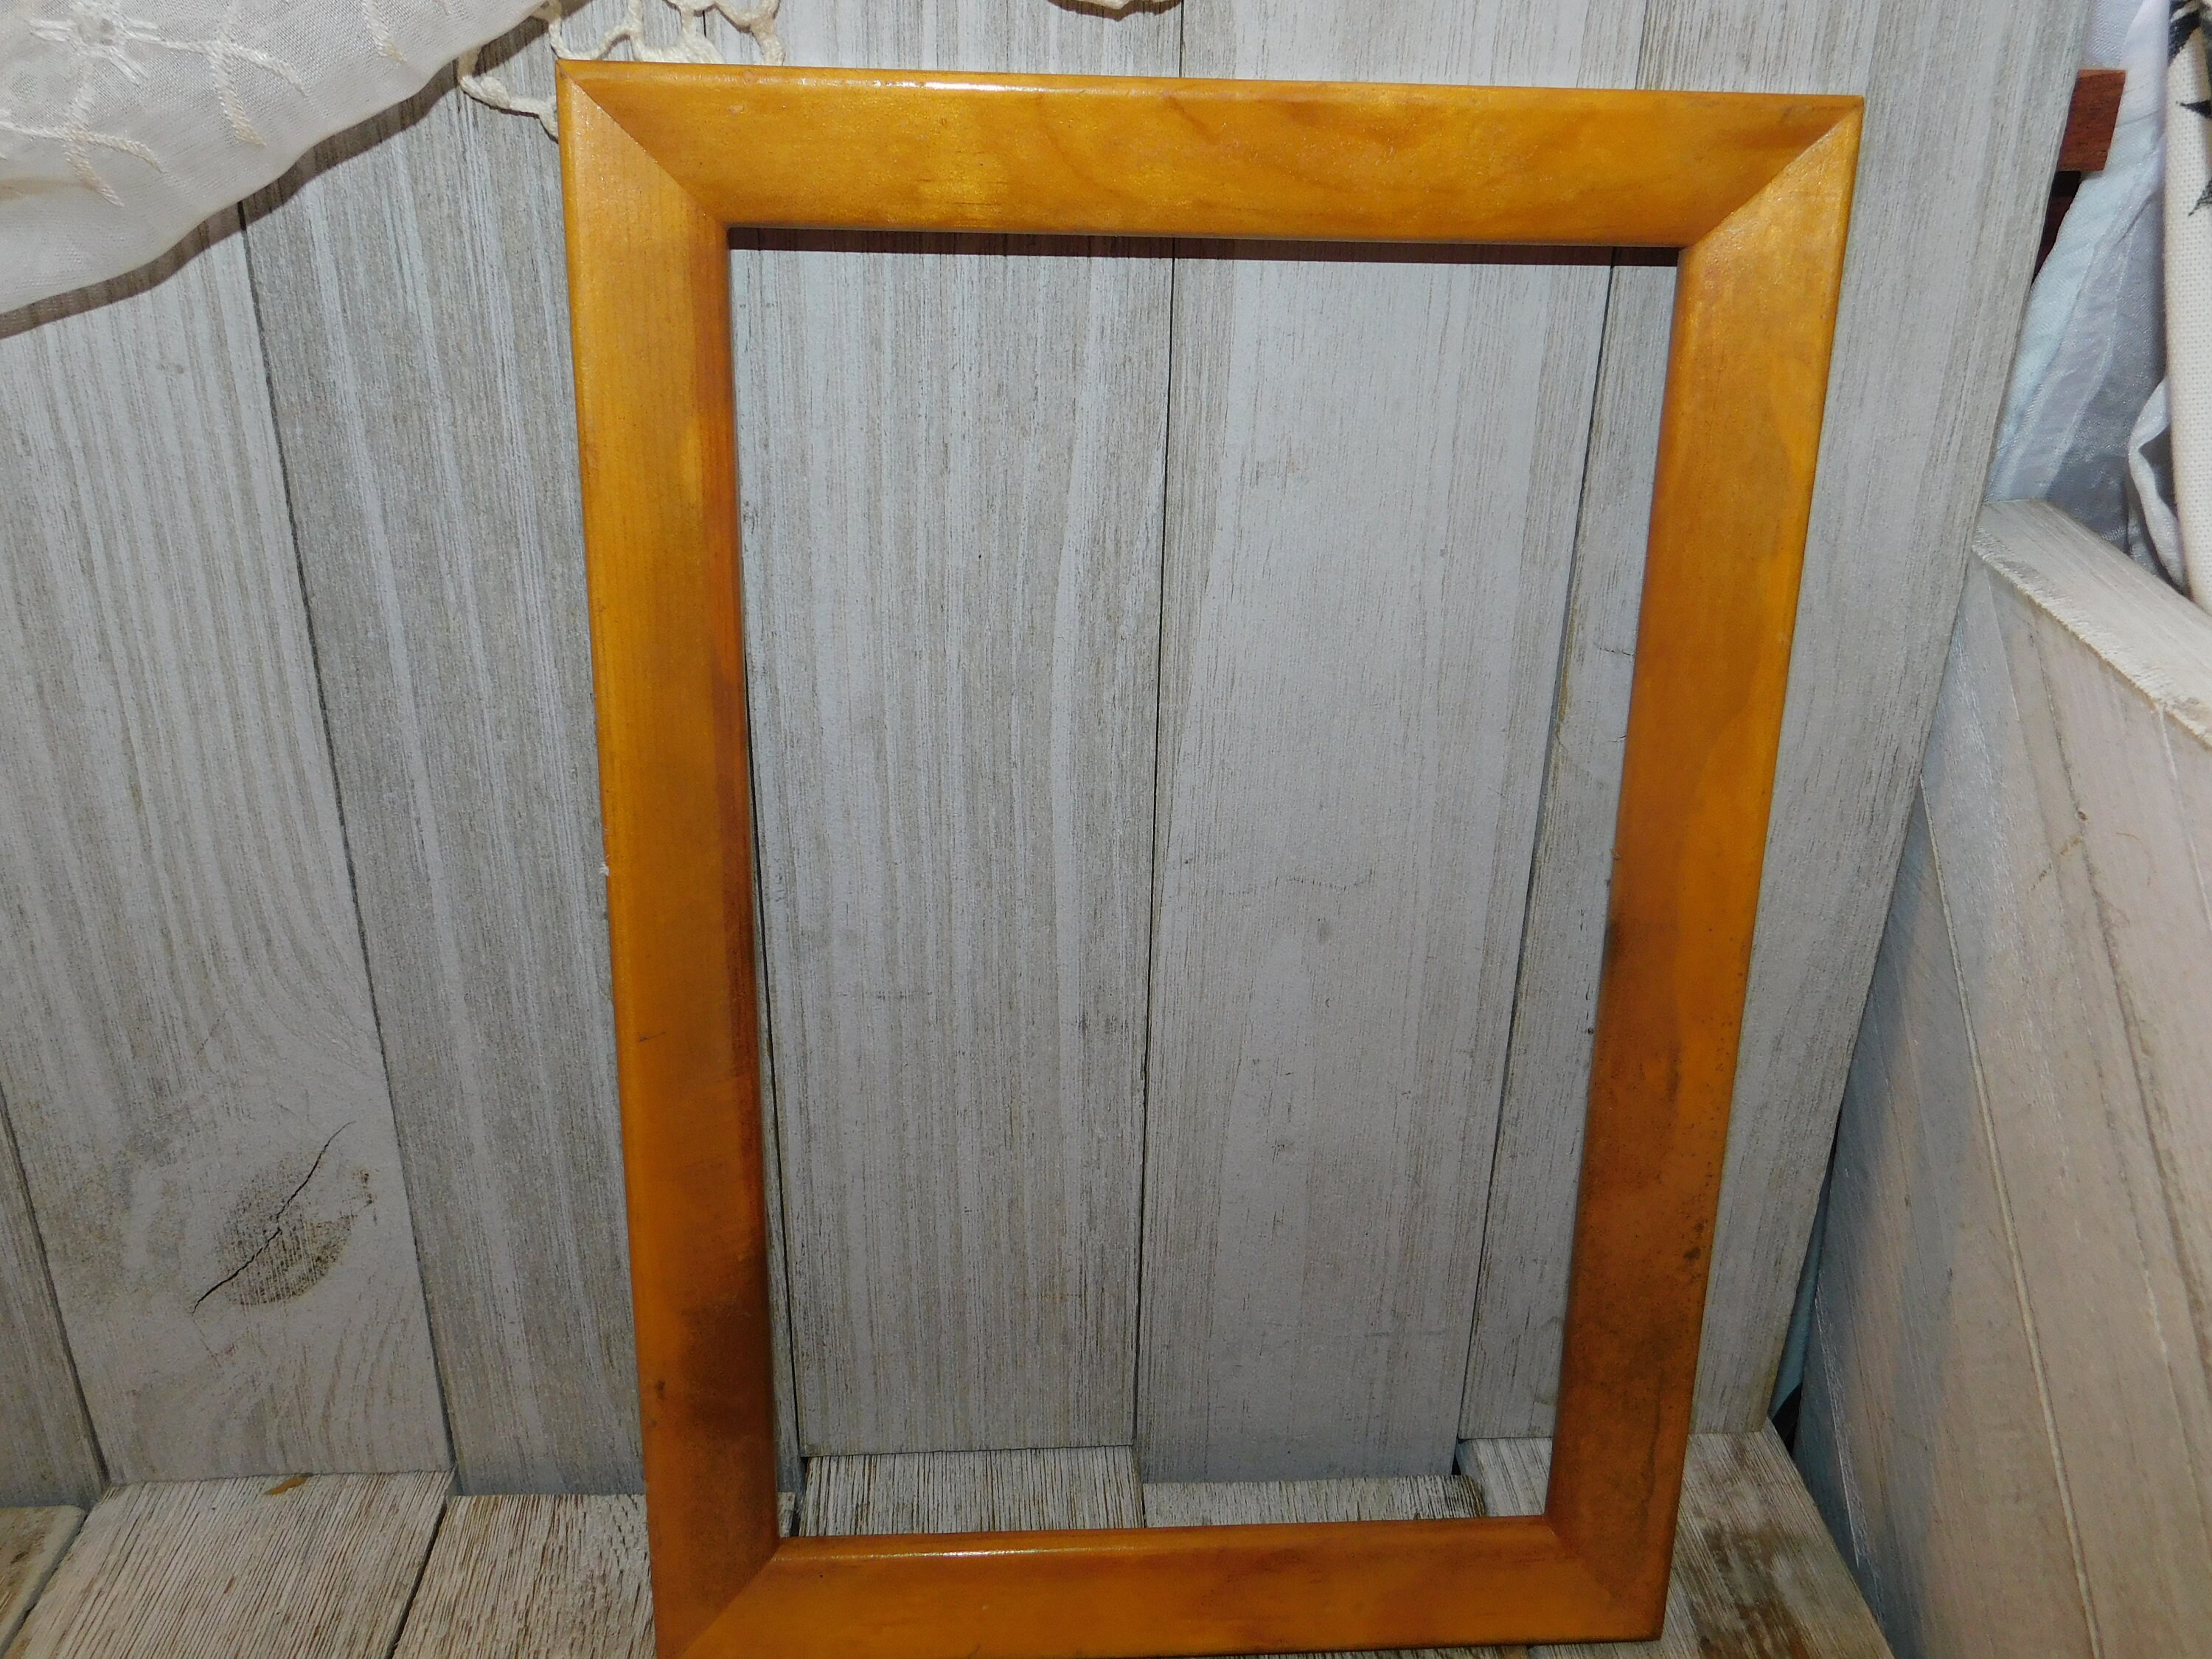 Large Wooden Picture Frame